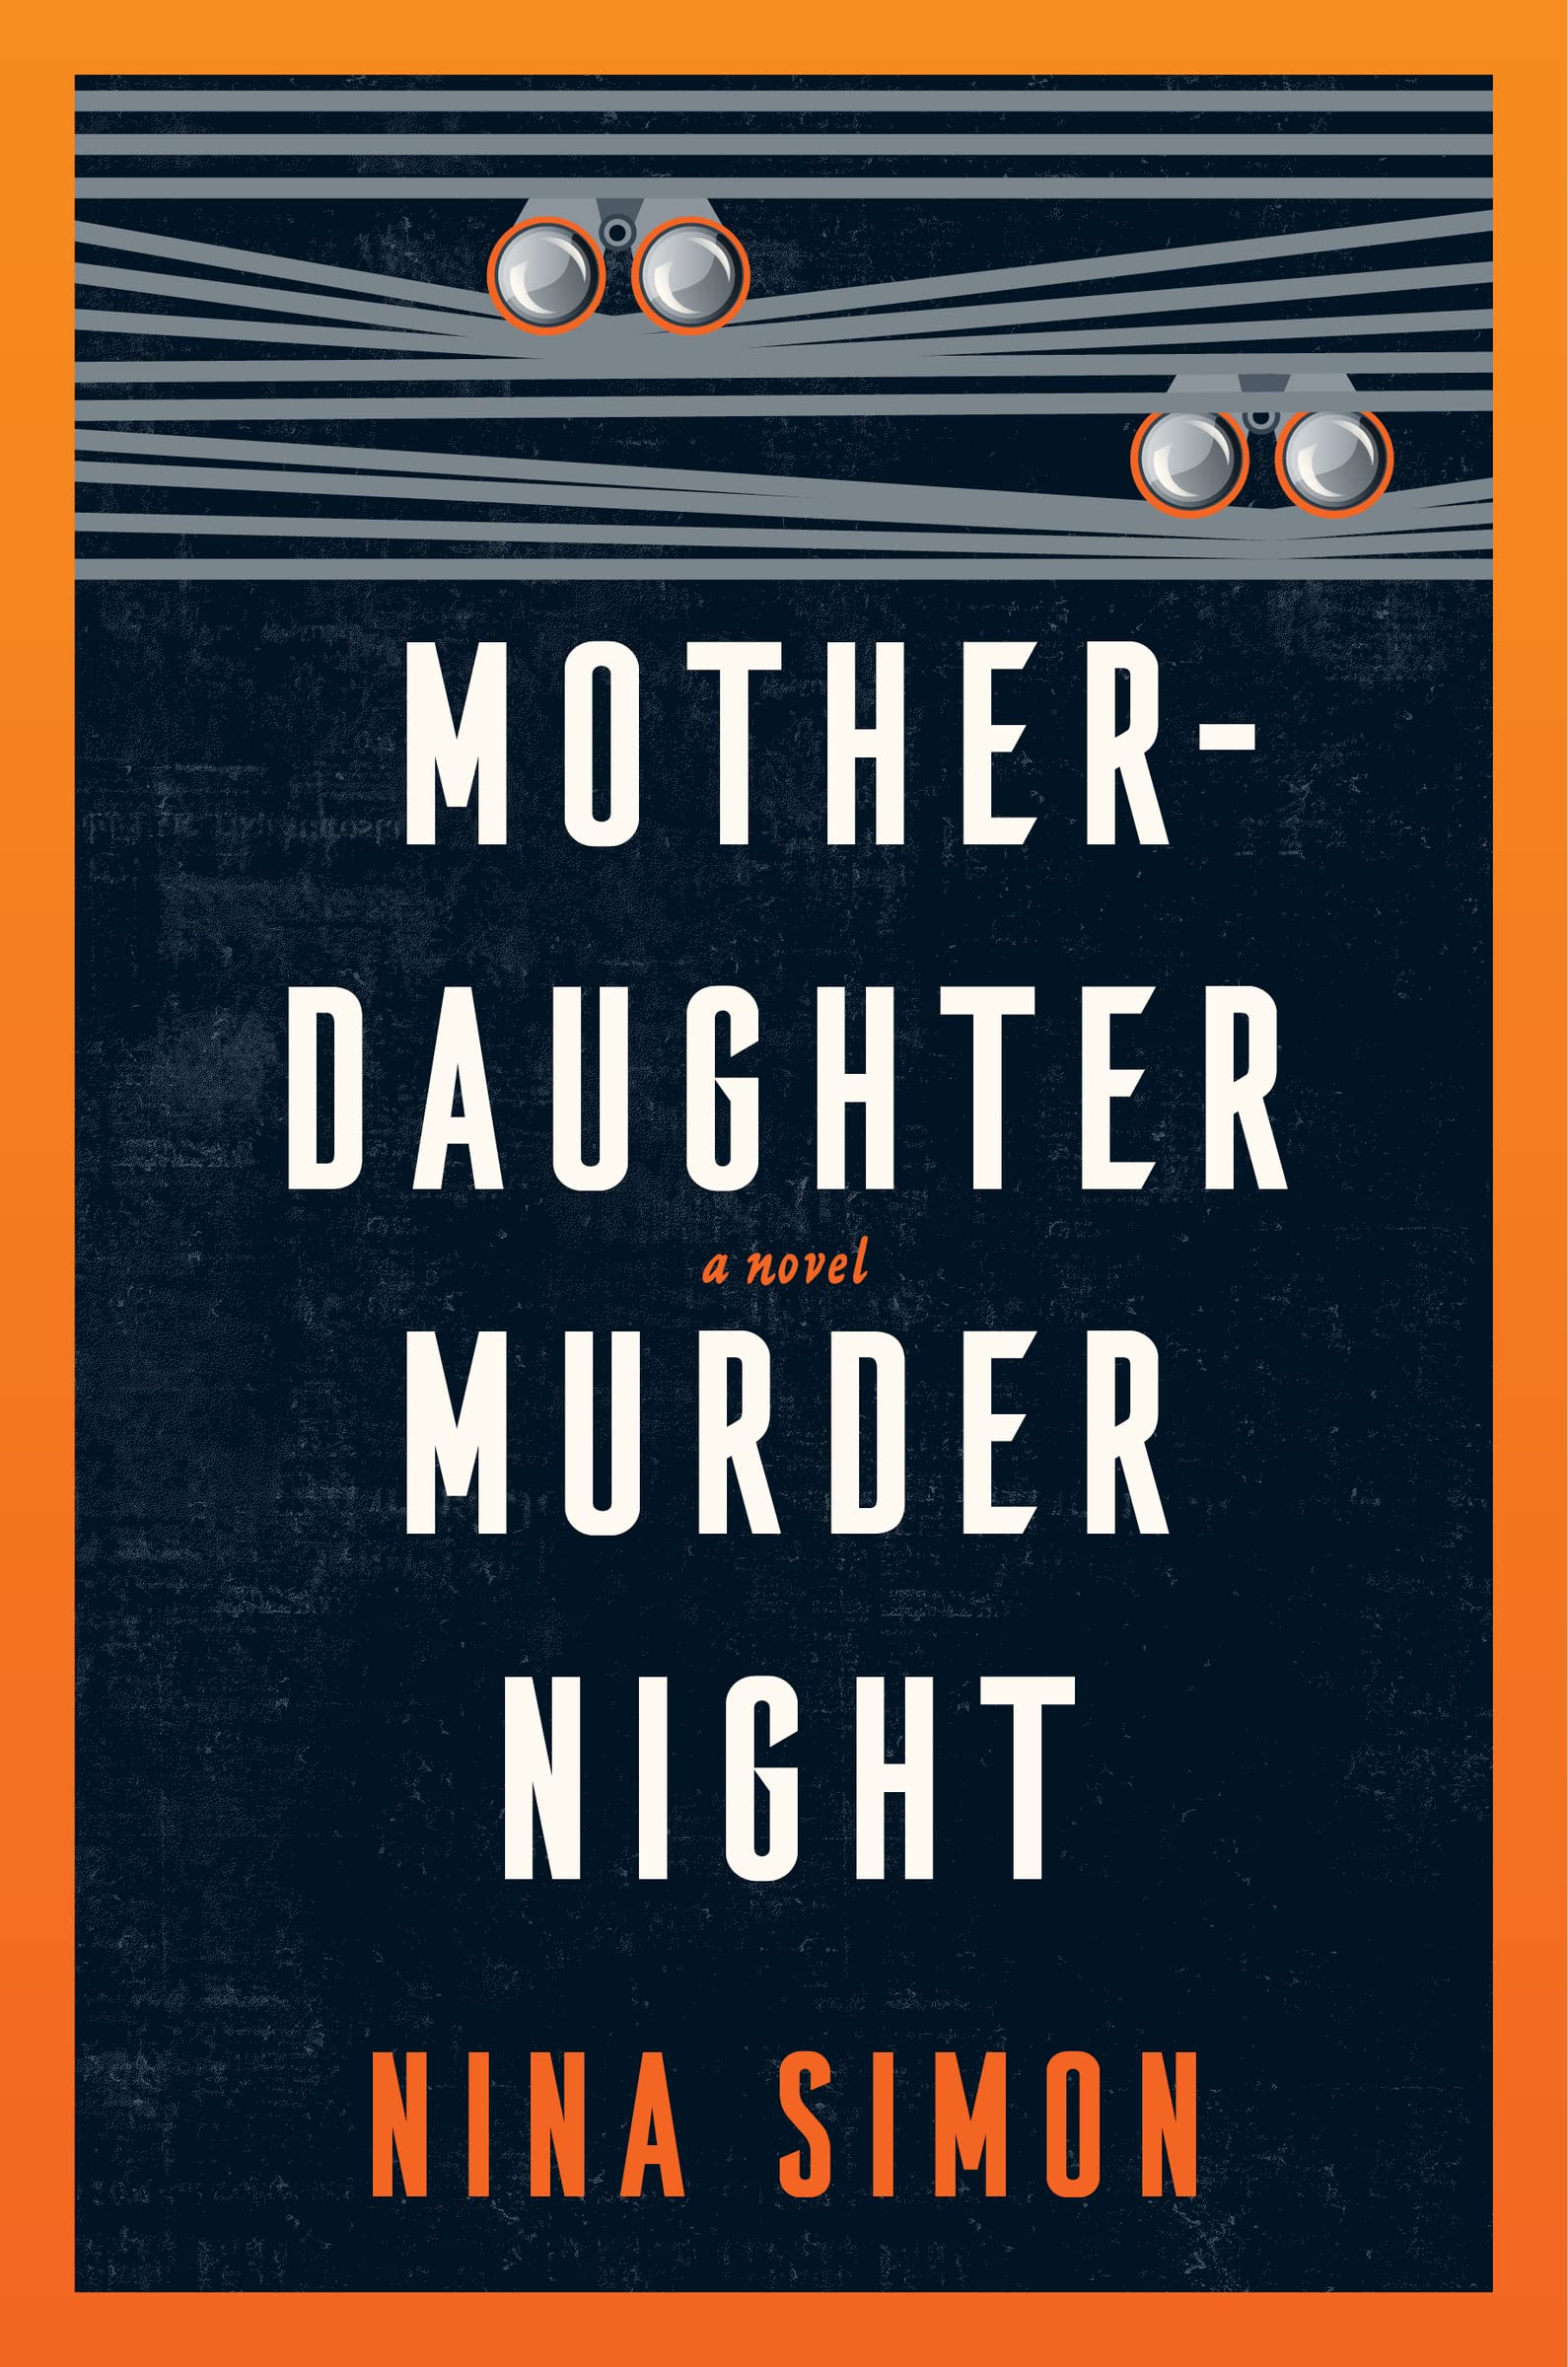 Image for "Mother-Daughter Murder Night"